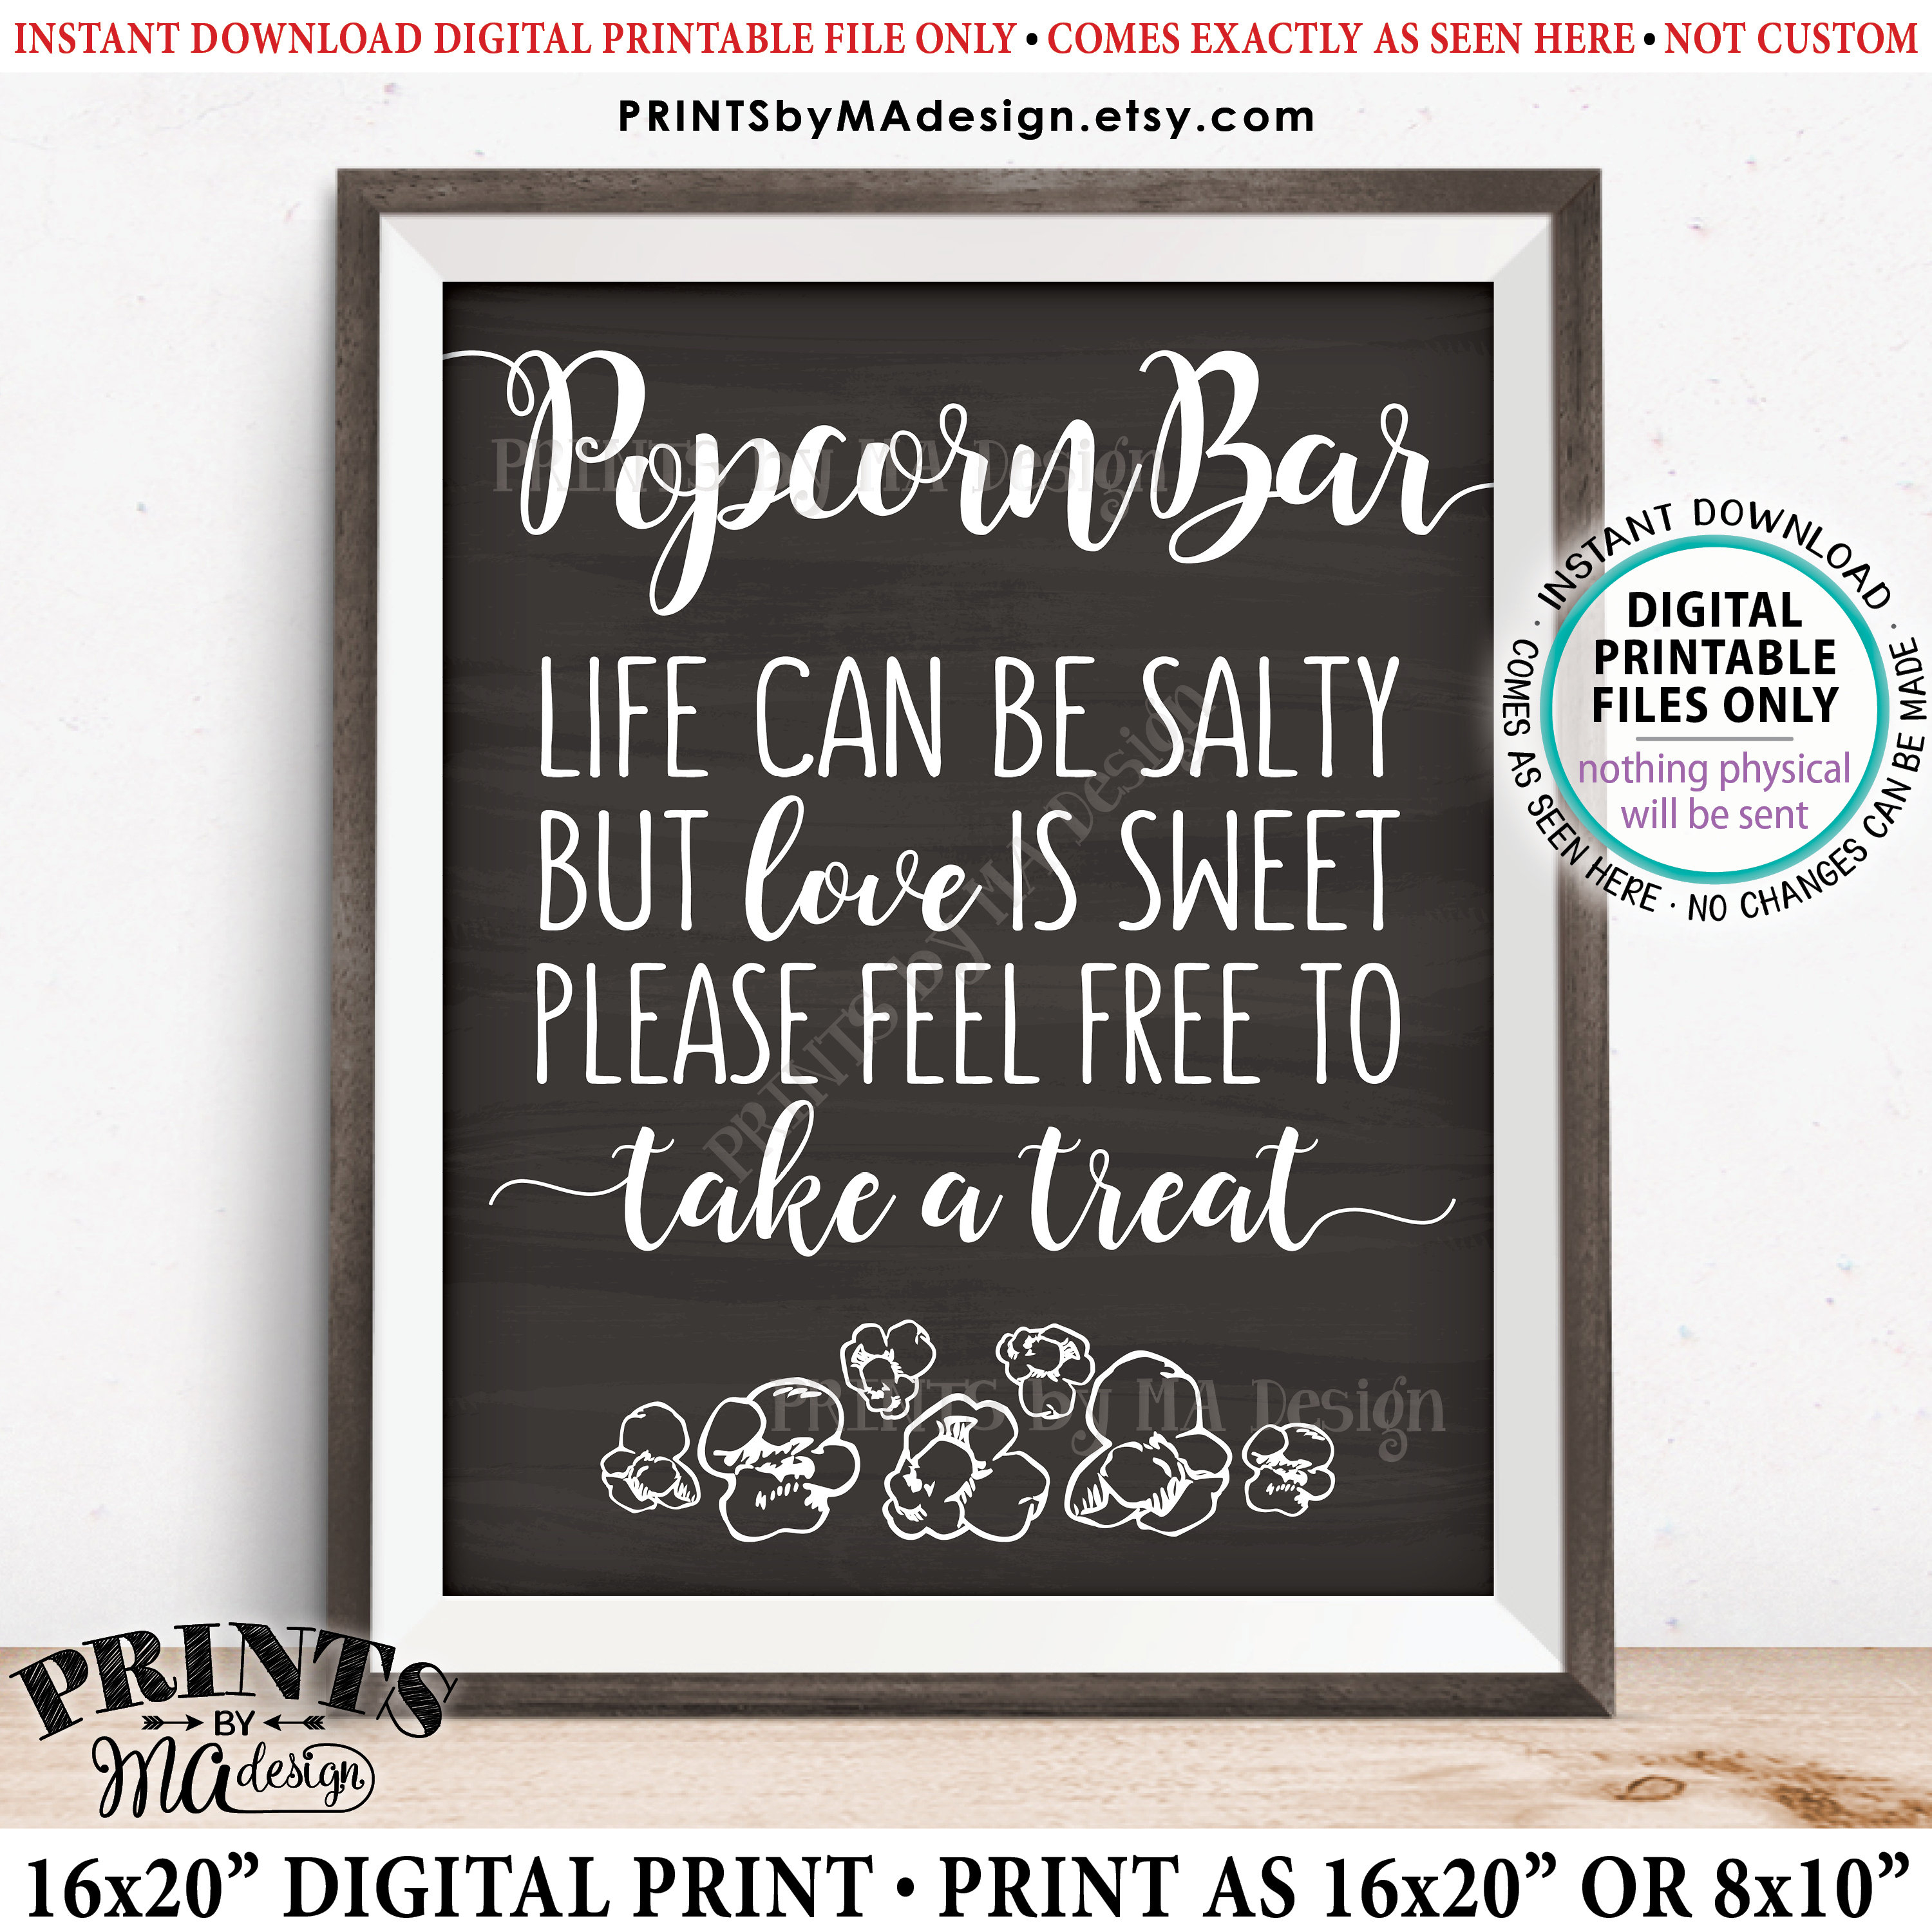 Popcorn Bar Sign, Life Can Be Salty But Love Is Sweet Take A Treat - Popcorn Bar Sign Printable Free